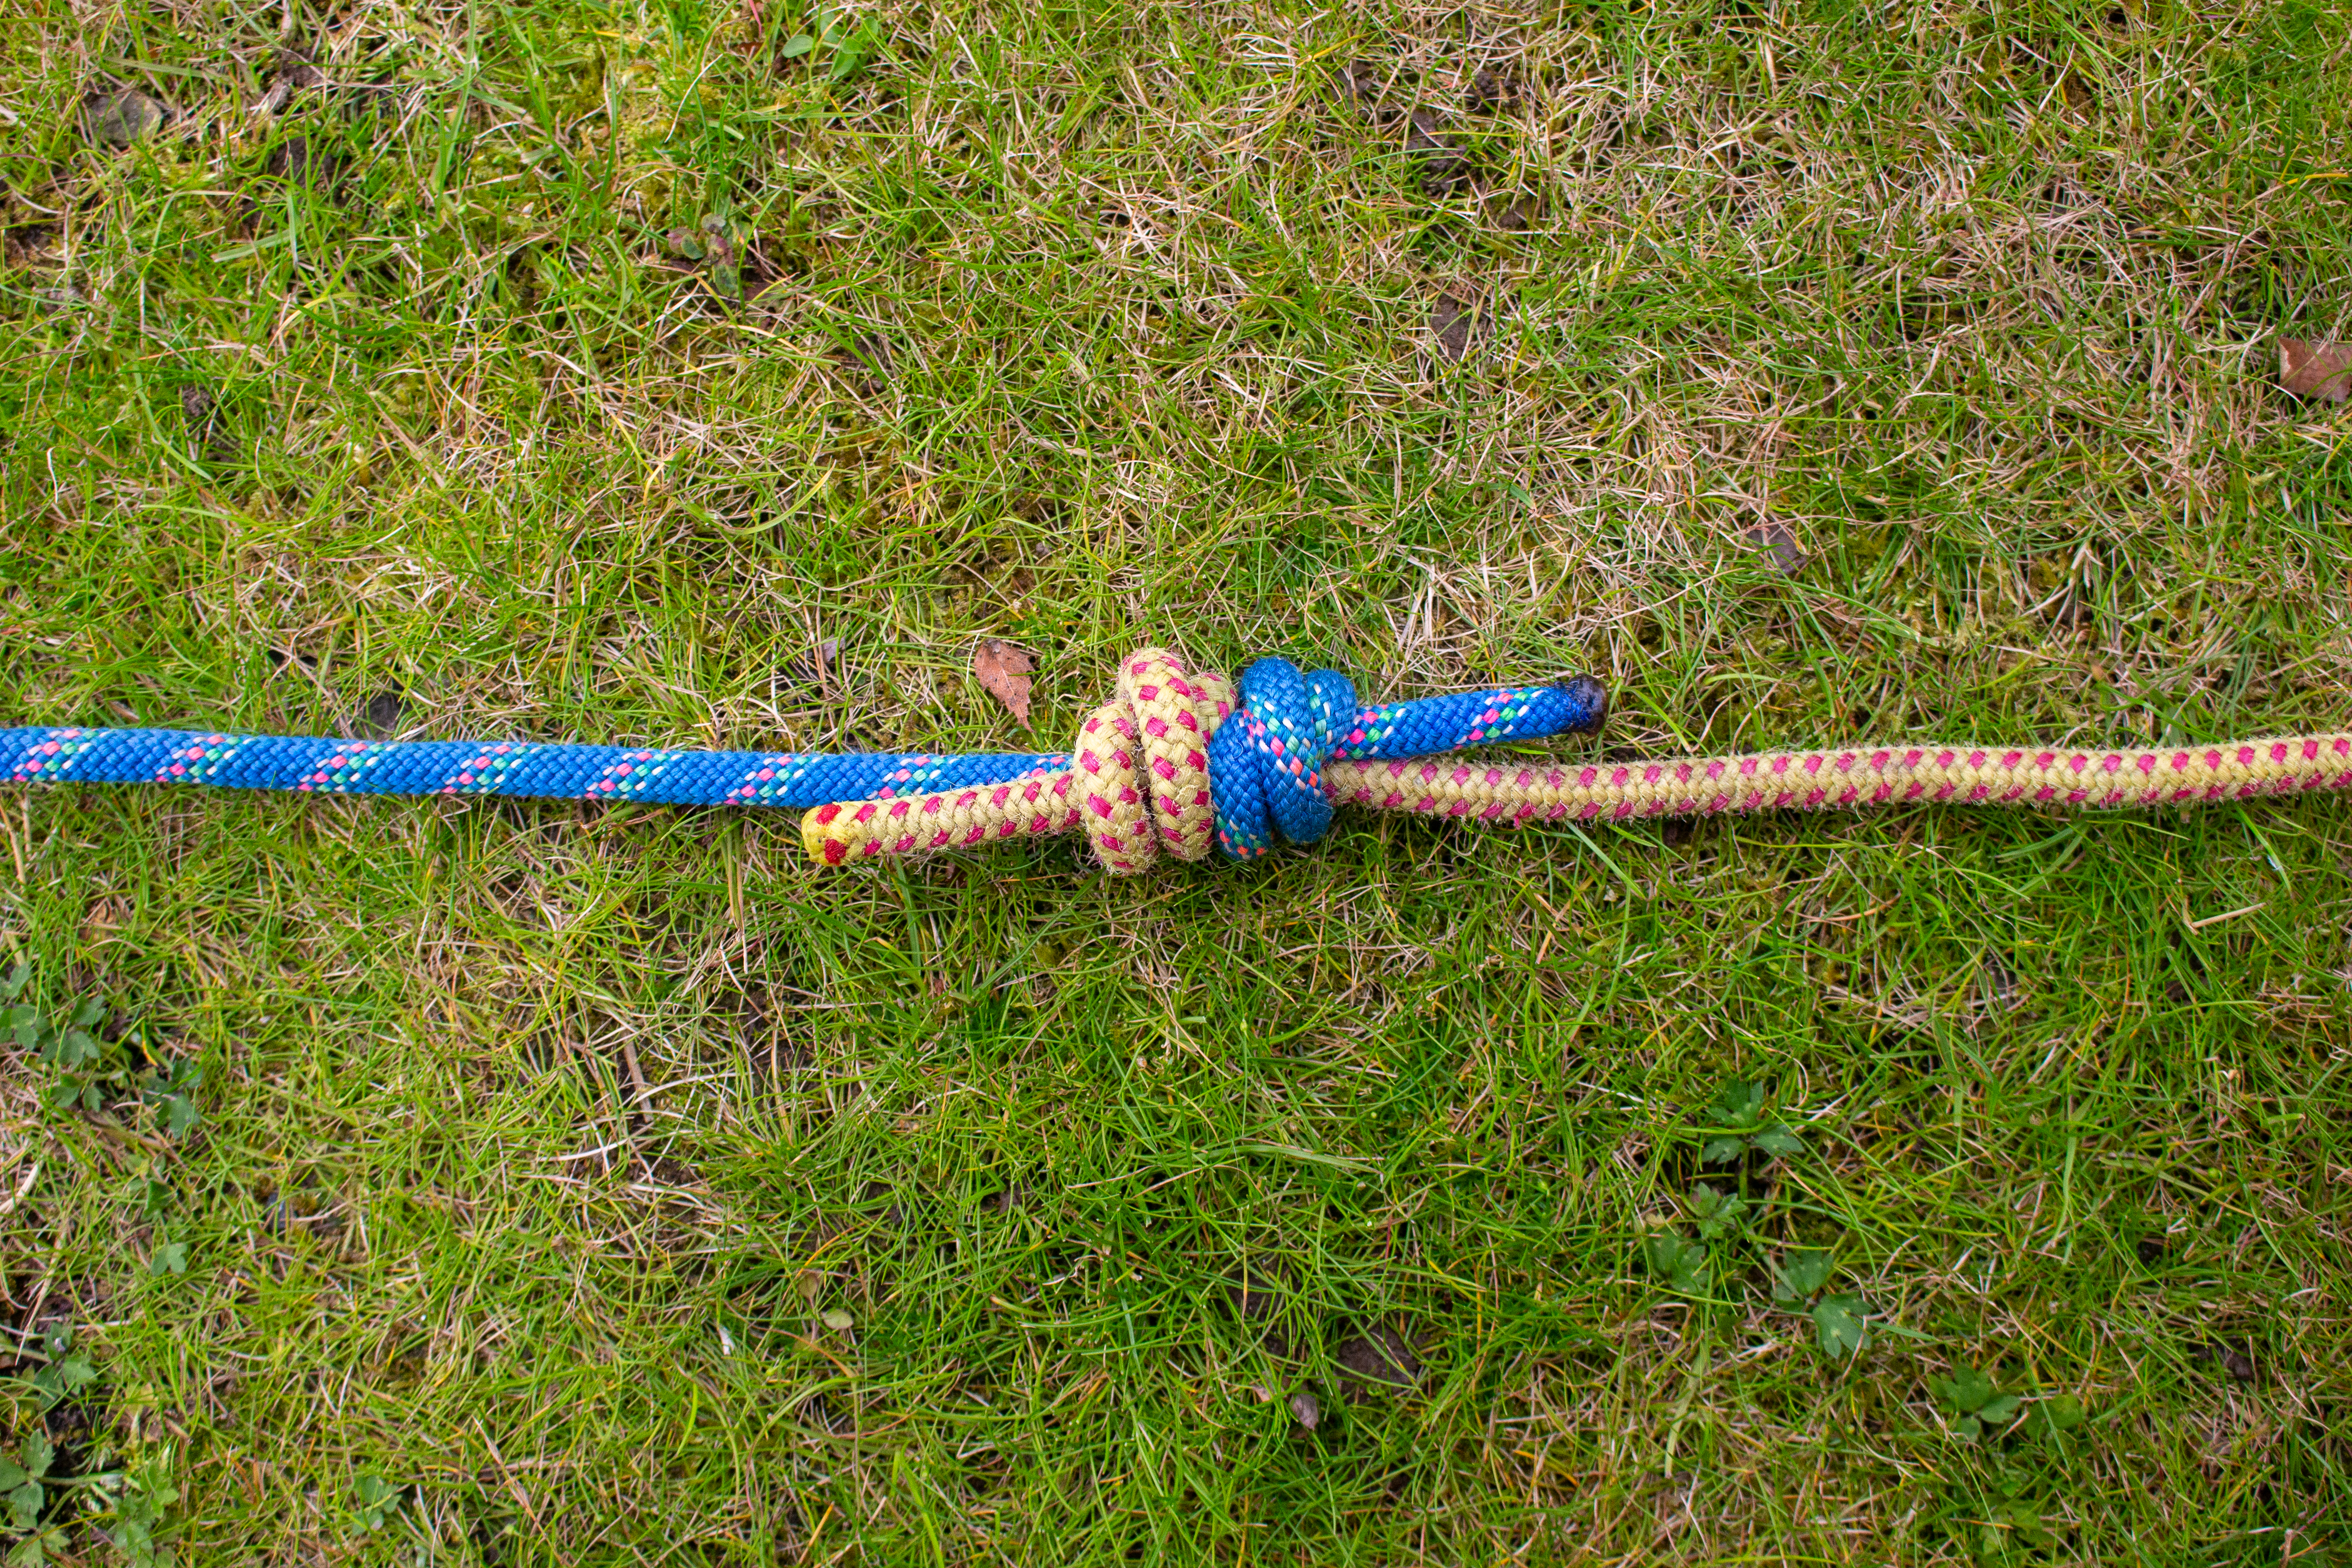 How to tie the double fisherman's knot (it's not just for rock